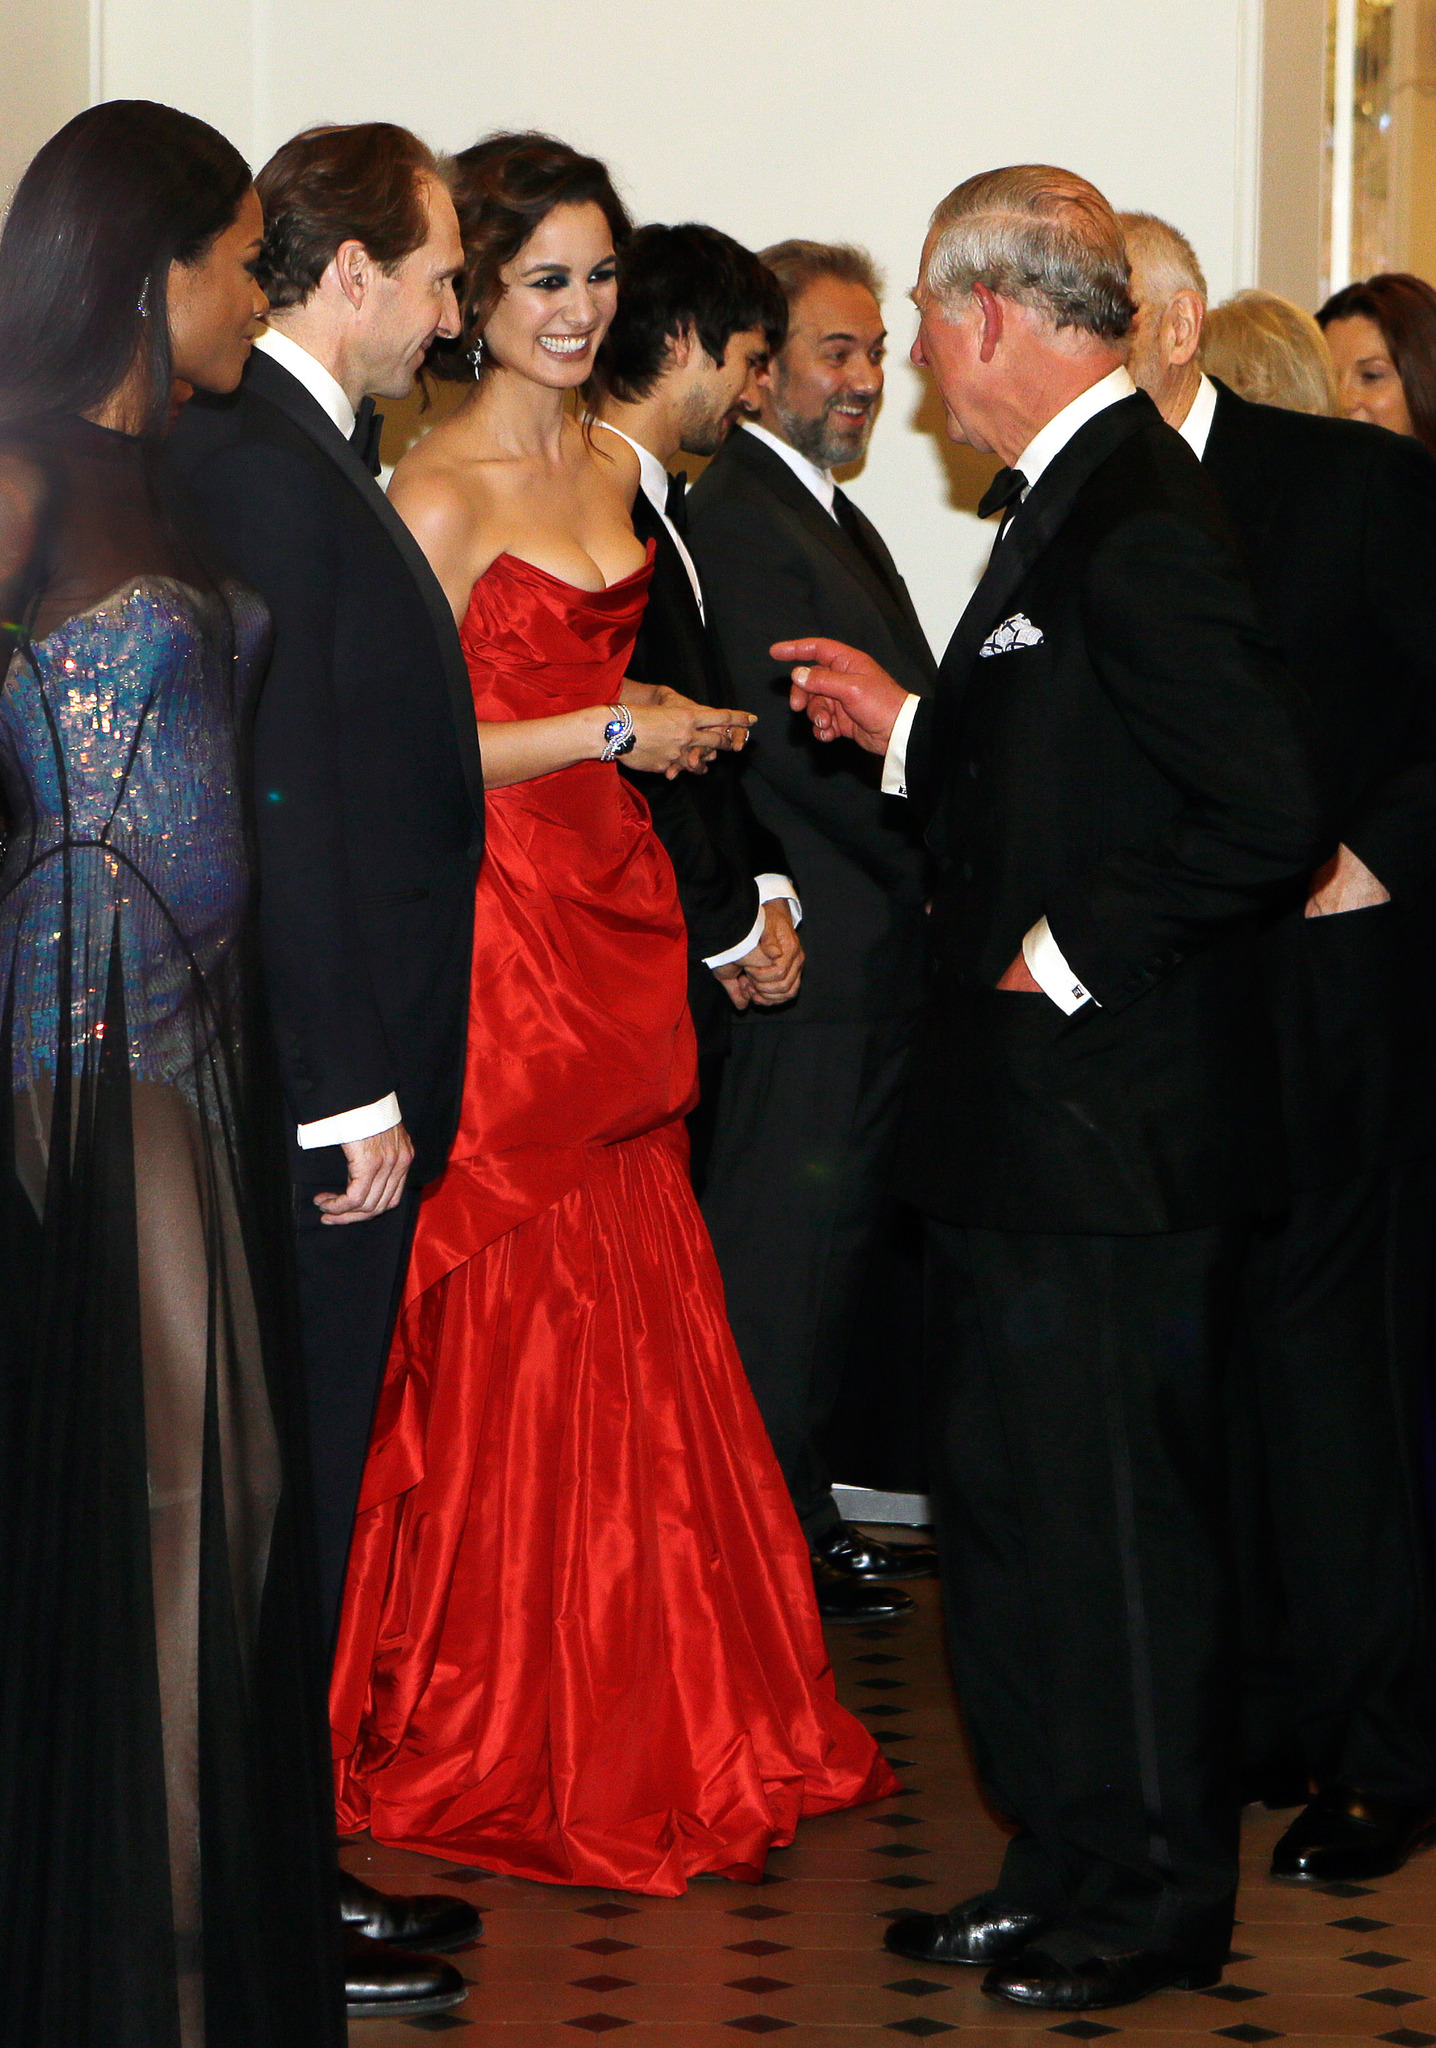 Ralph Fiennes, Sam Mendes, Naomie Harris, Prince Charles, Ben Whishaw and Bérénice Marlohe at event of Operacija Skyfall (2012)